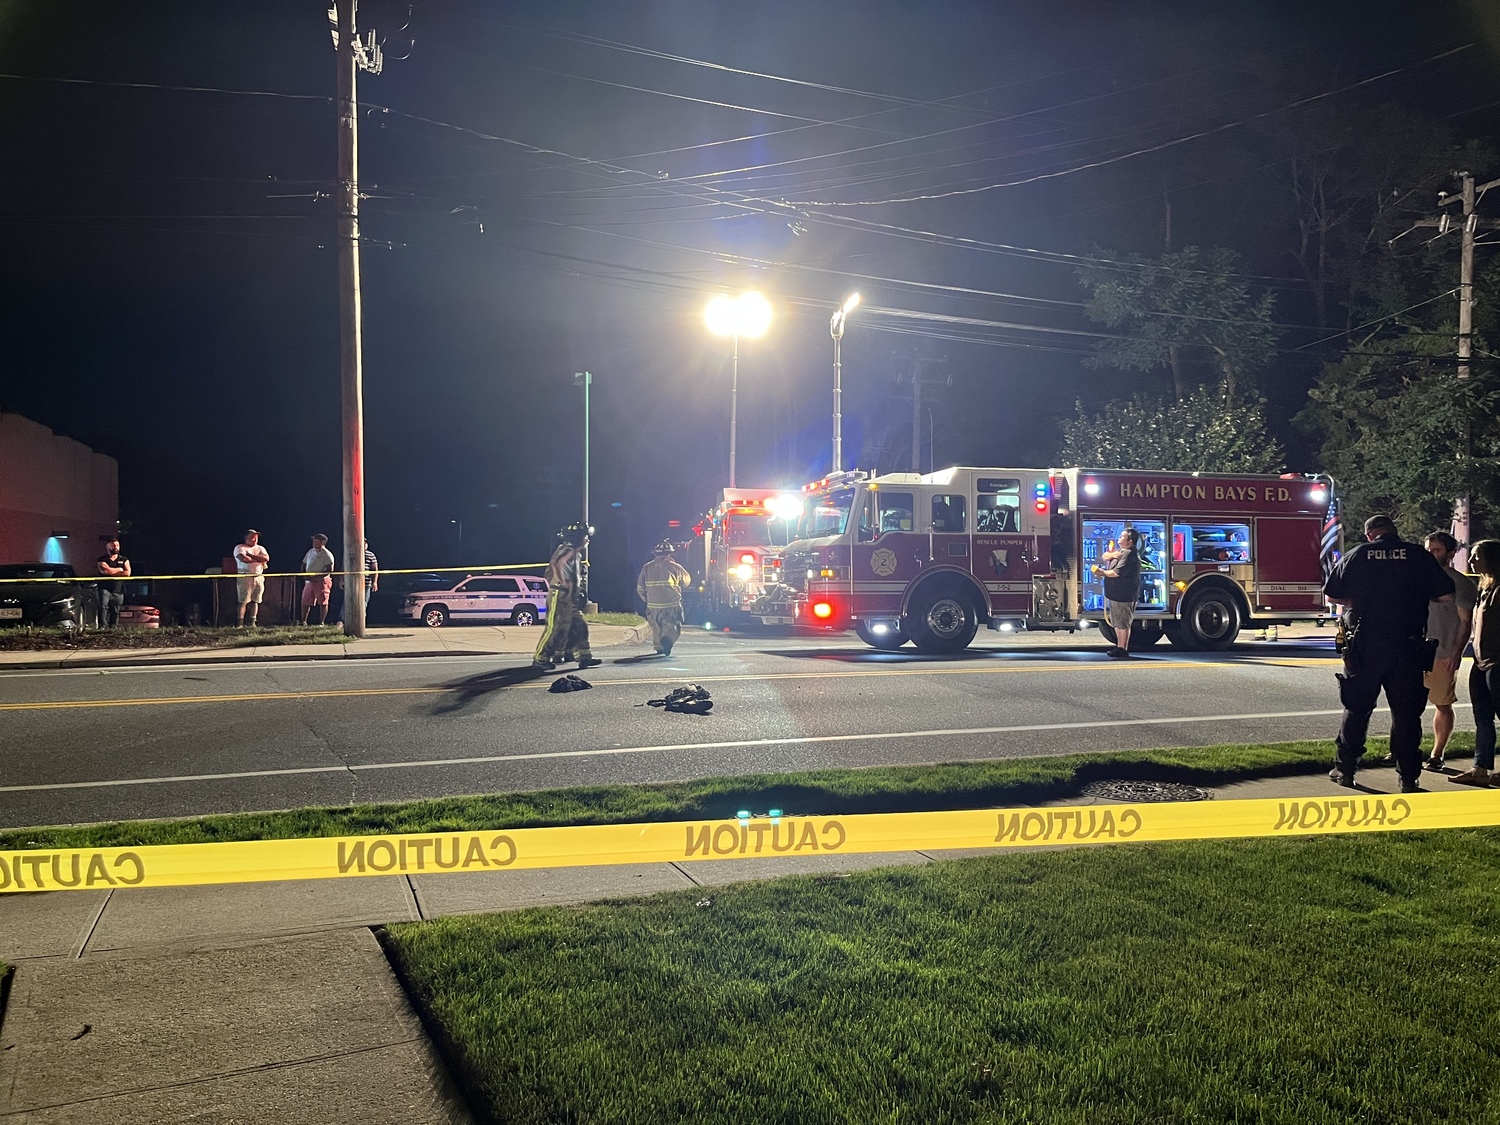 A pedestrian was killed after being hit by a hit-and-run driver in Hampton Bays Friday night.